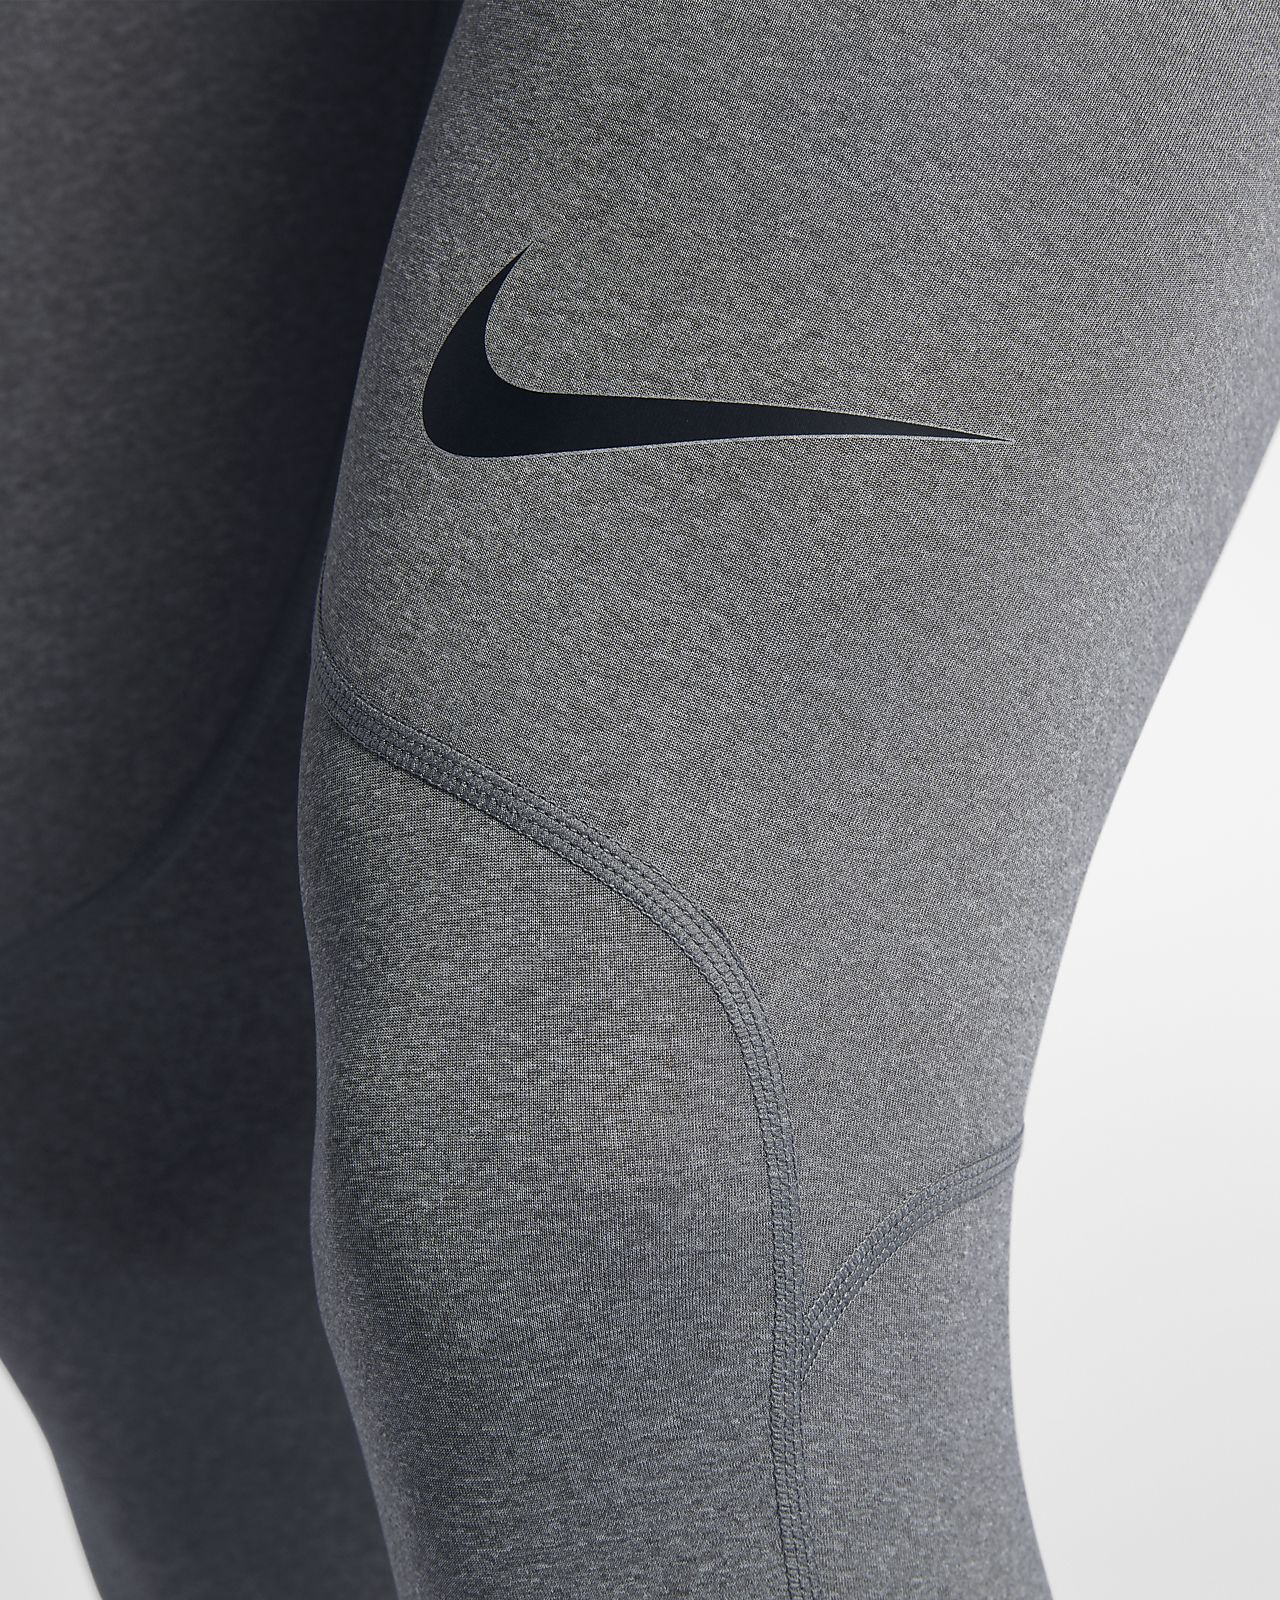 Nike Compression Tights 3 4 Size Chart